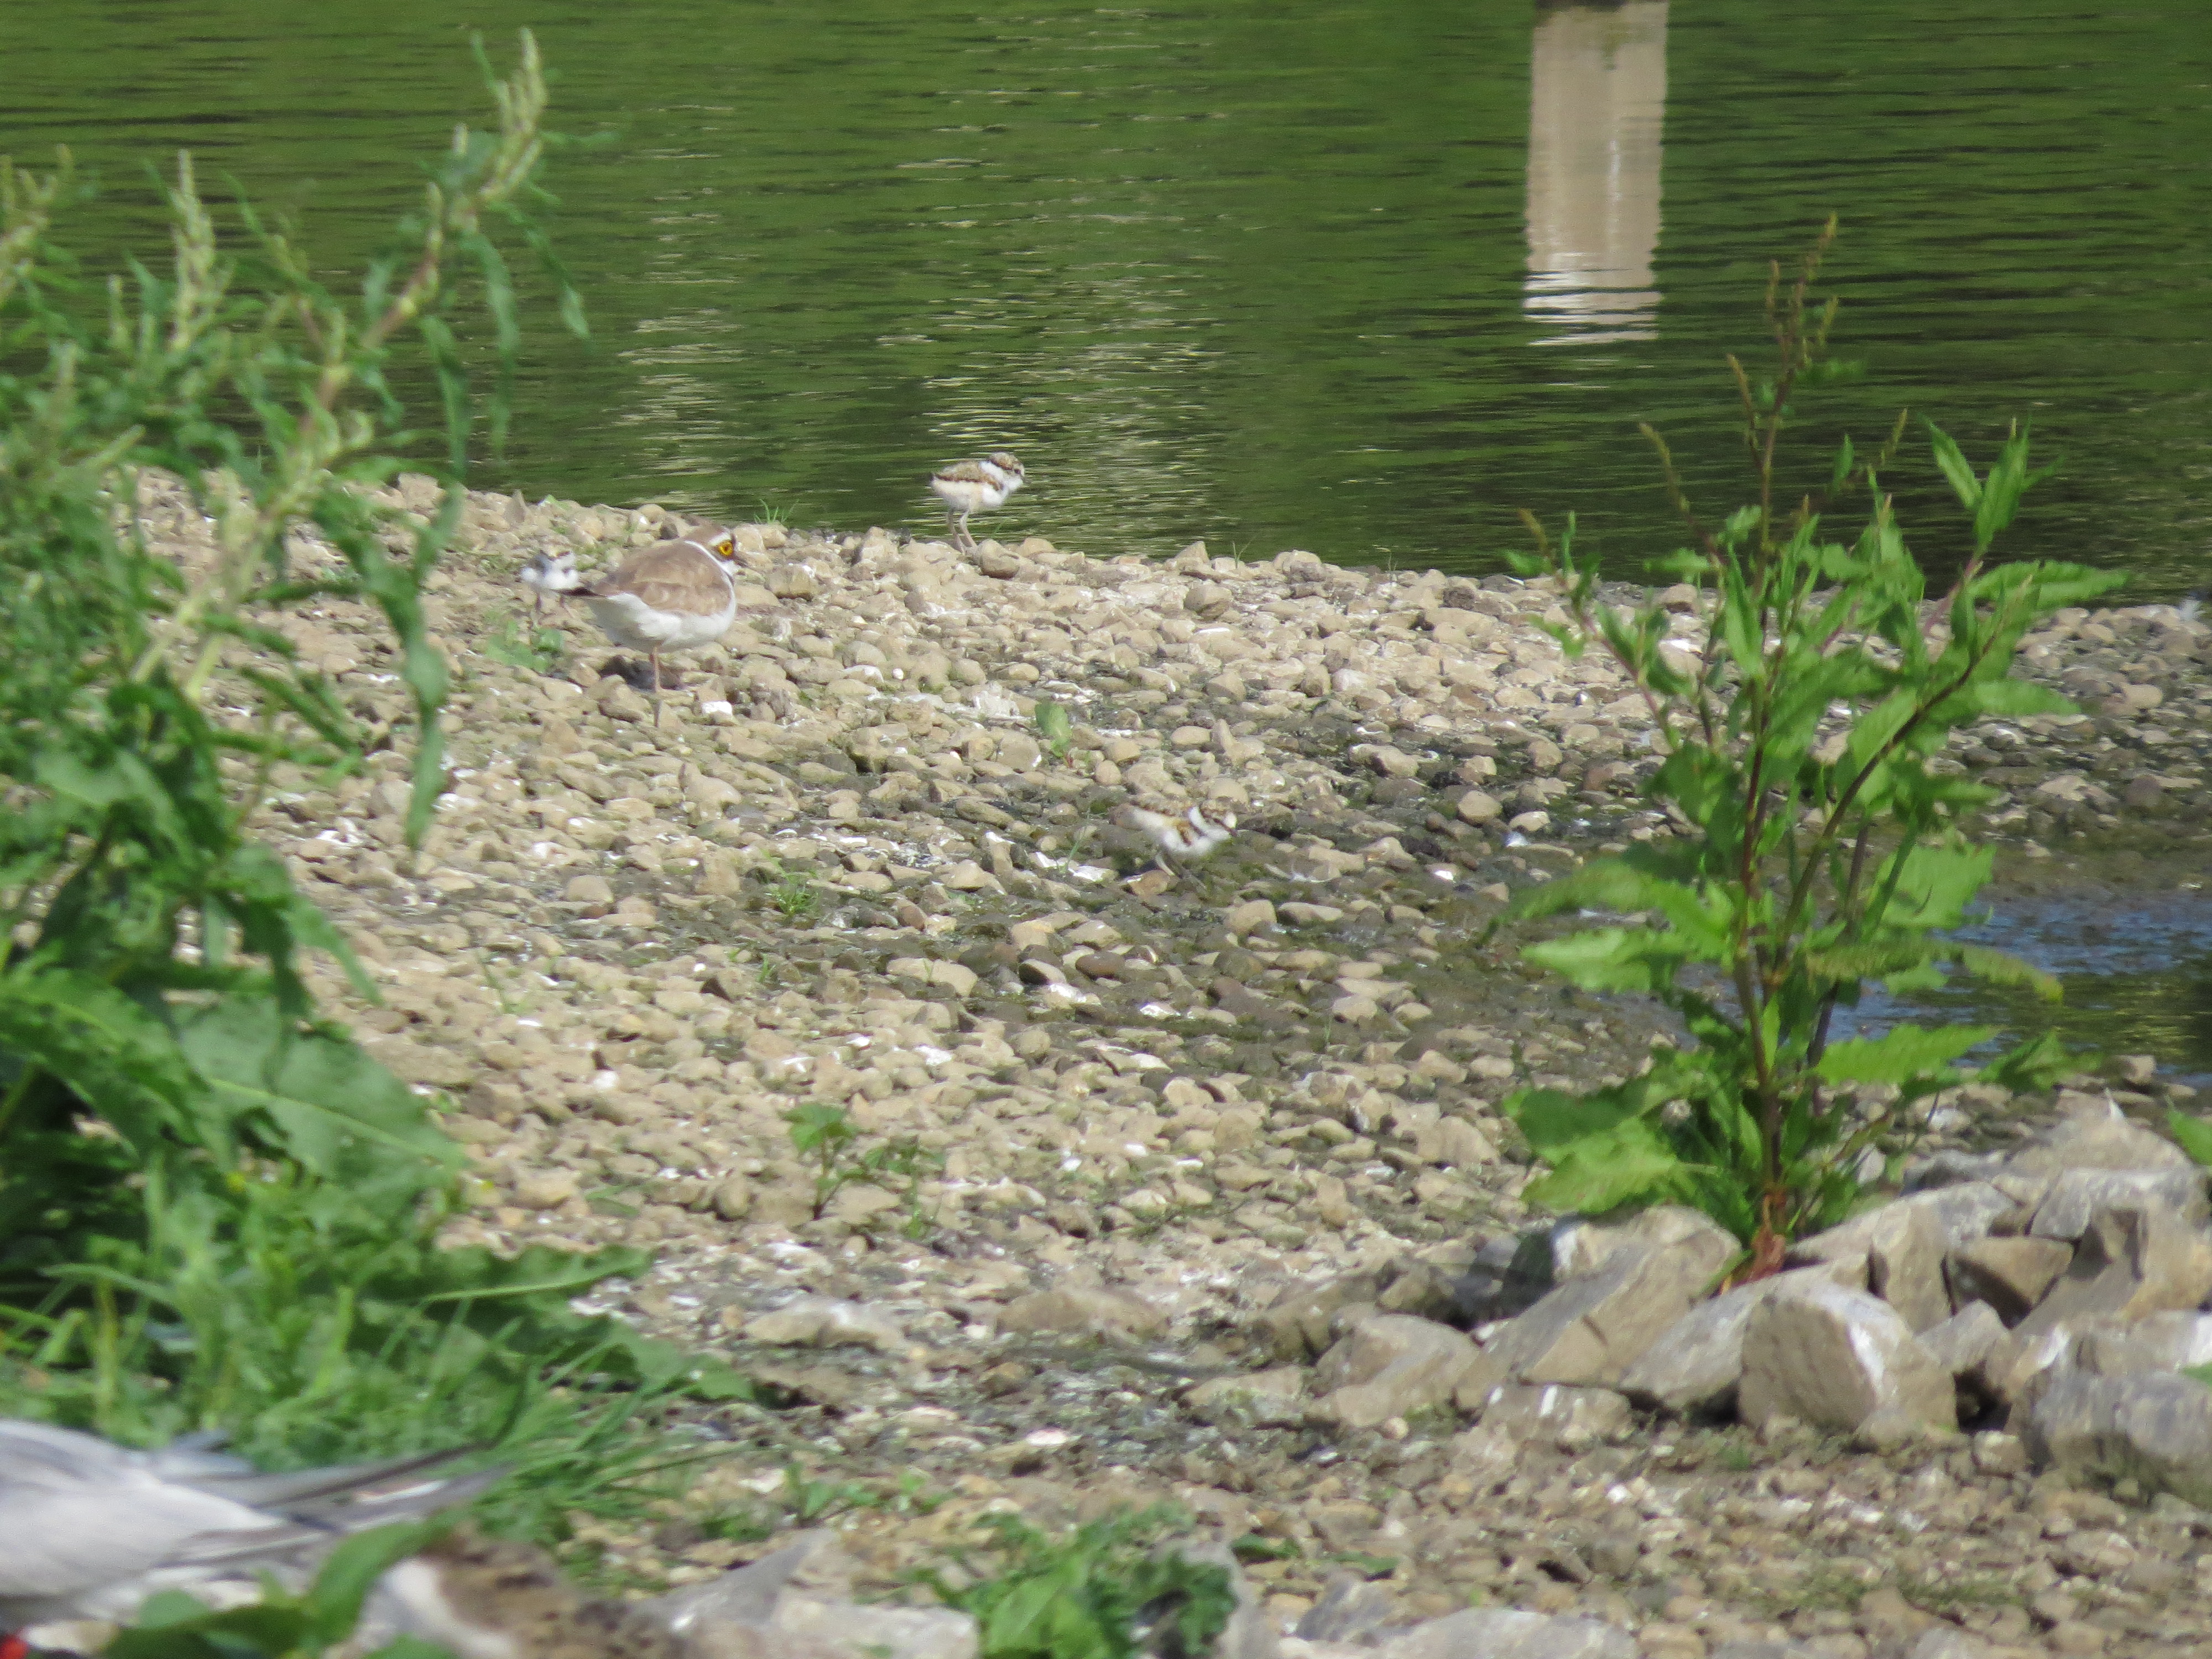 Little ringed plover with chicks